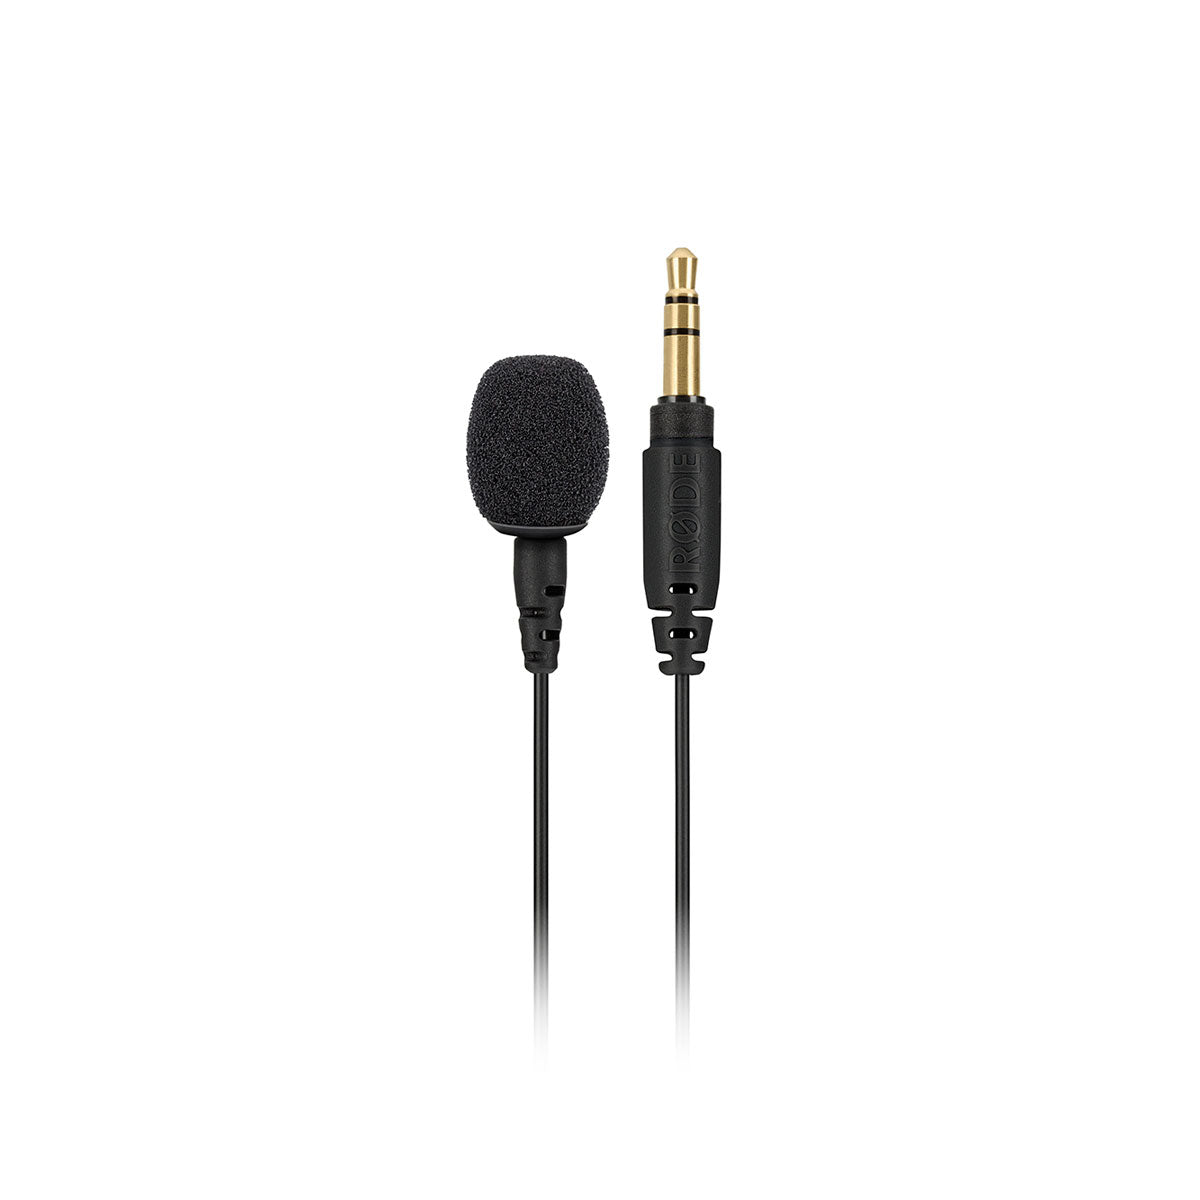 RØDE Lavalier GO - New Lavalier Mic to Pair with RØDE Wireless GO